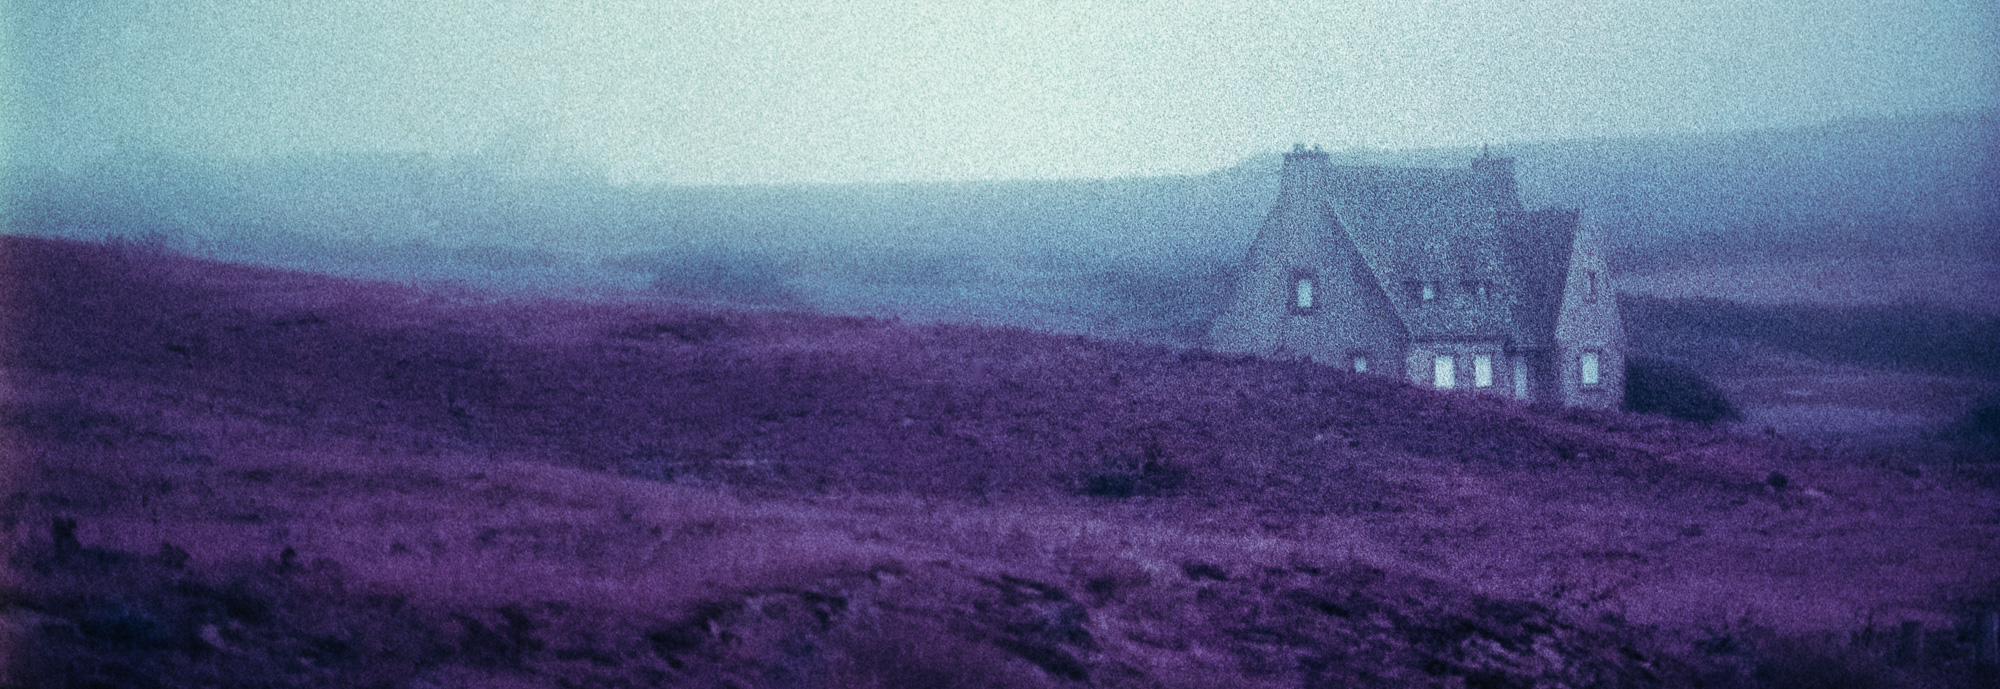 Photography of hills and a stone building in Brittany. The colors of the photography are reversed: the hills are strong purple, the sky appears turquoise.